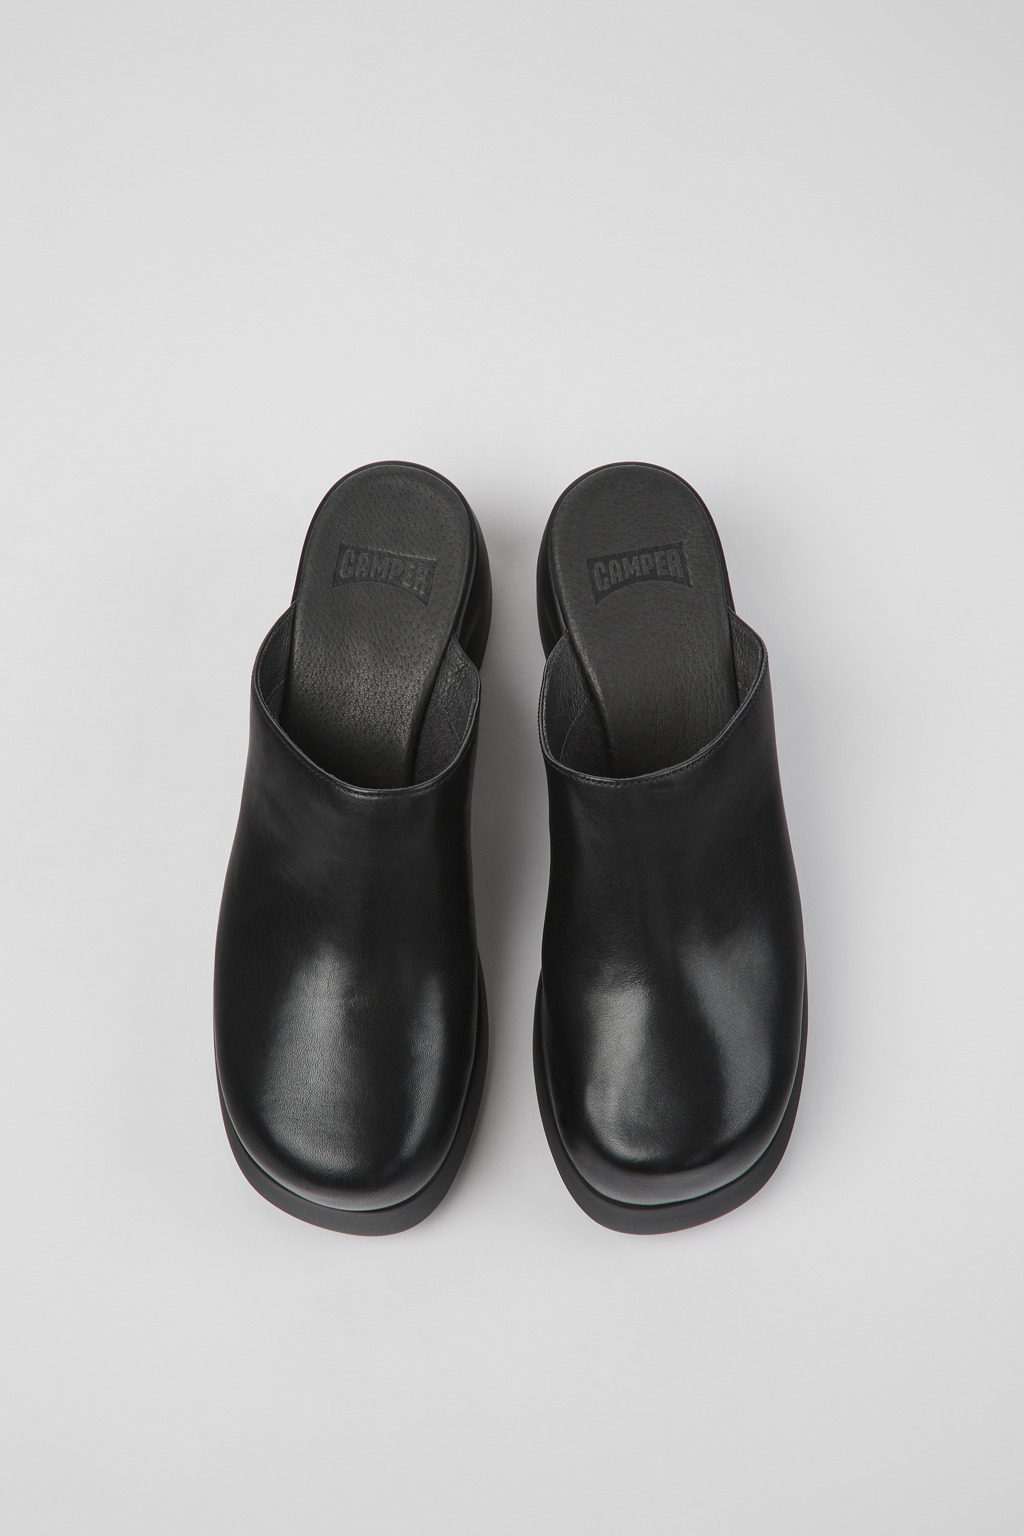 Kaah Black Clogs for Women - Spring/Summer collection - Camper 